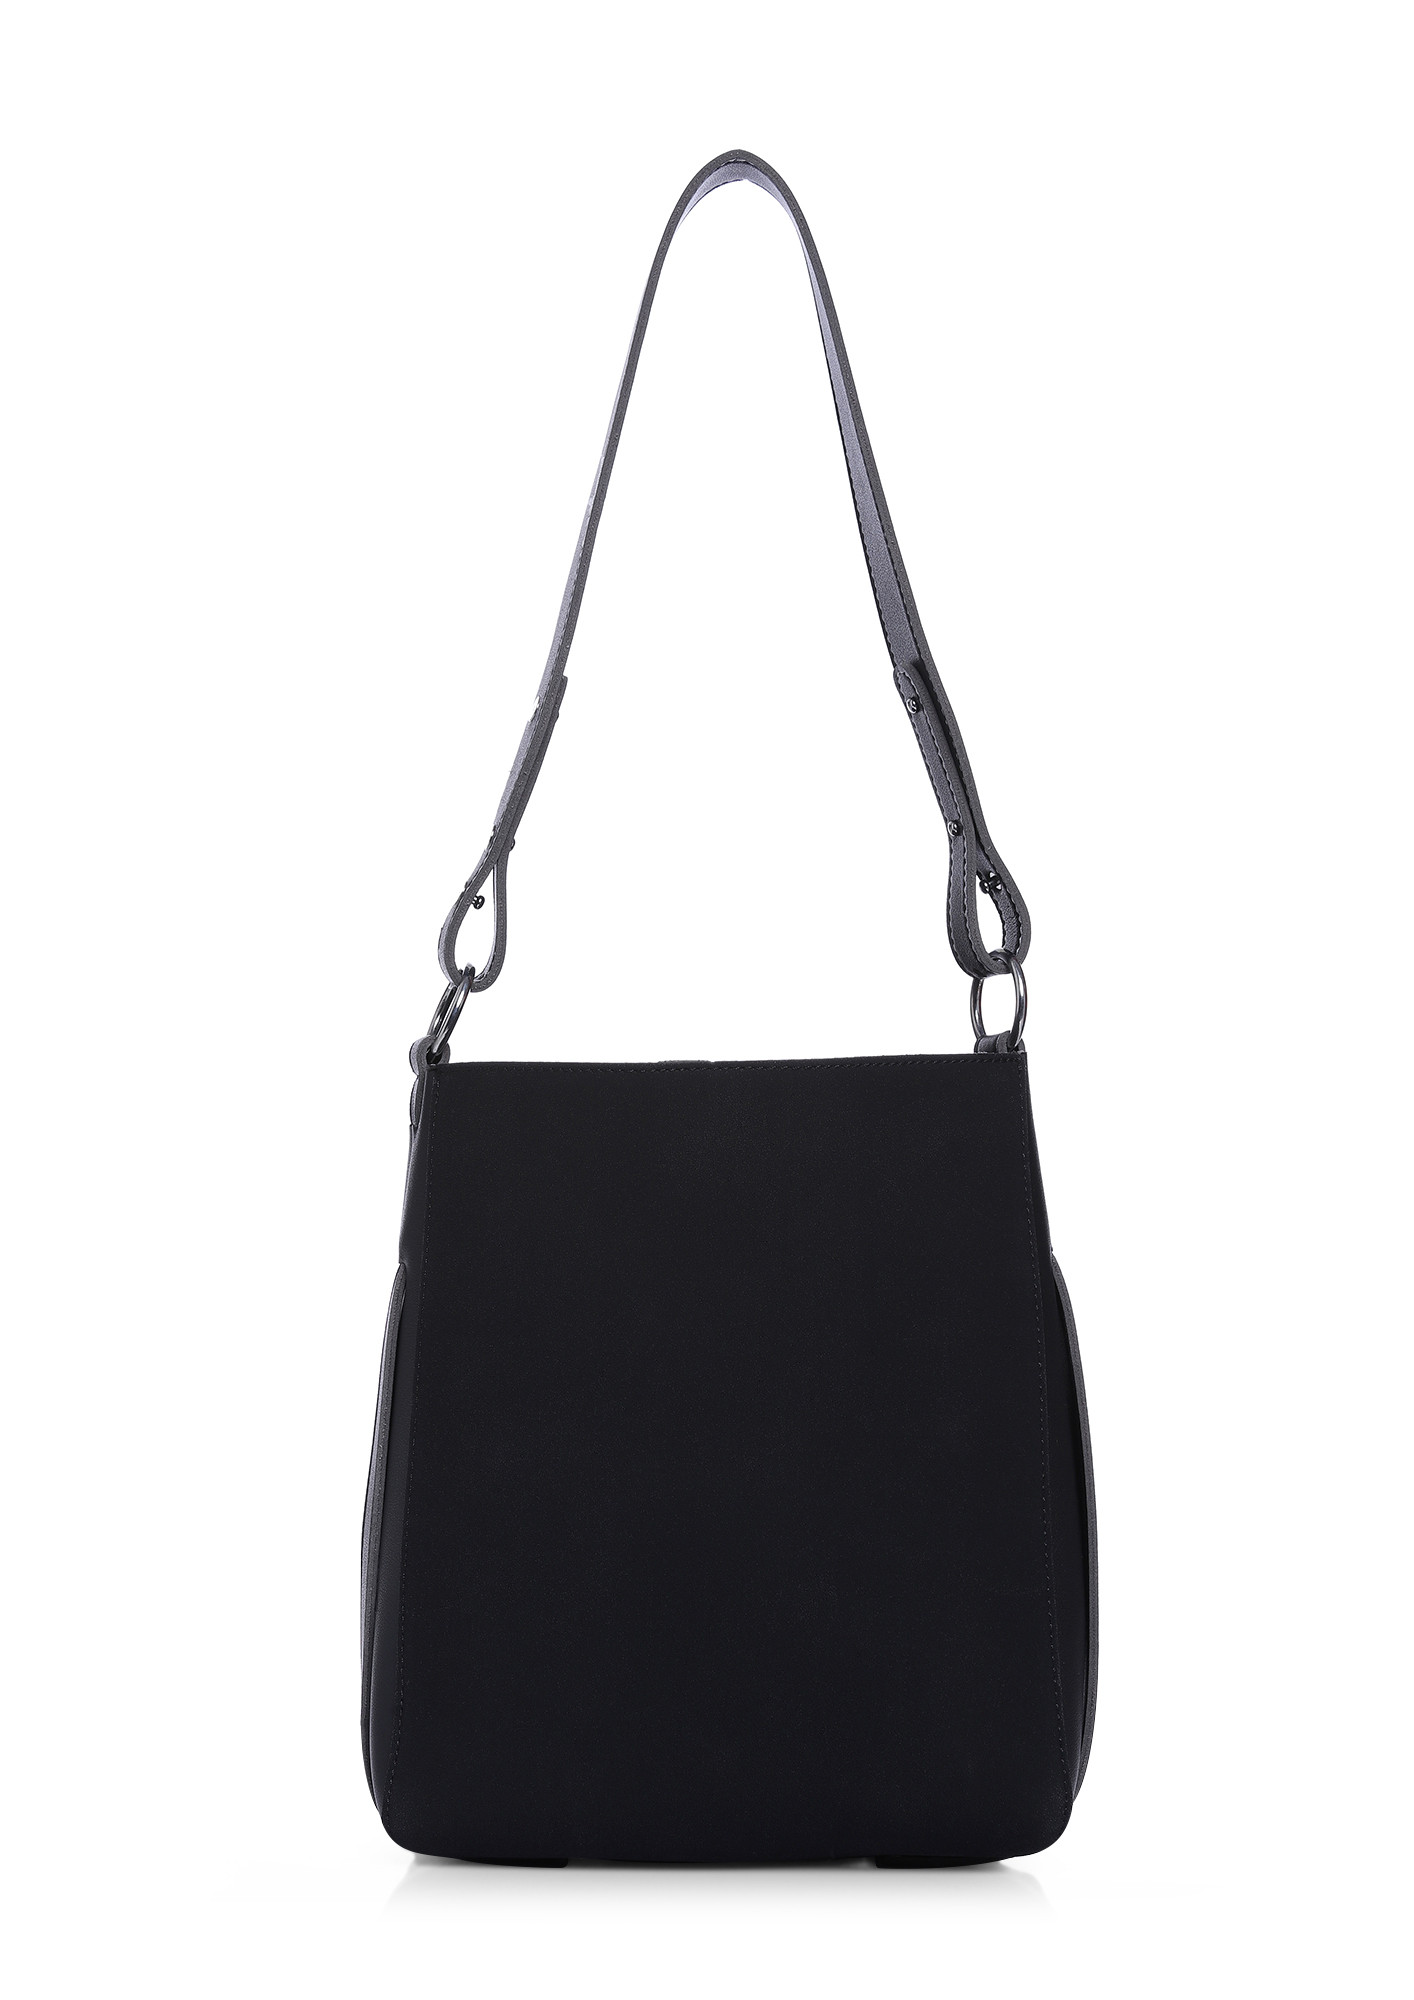 ERRYTHING IN PLACE BLACK TOTE BAG